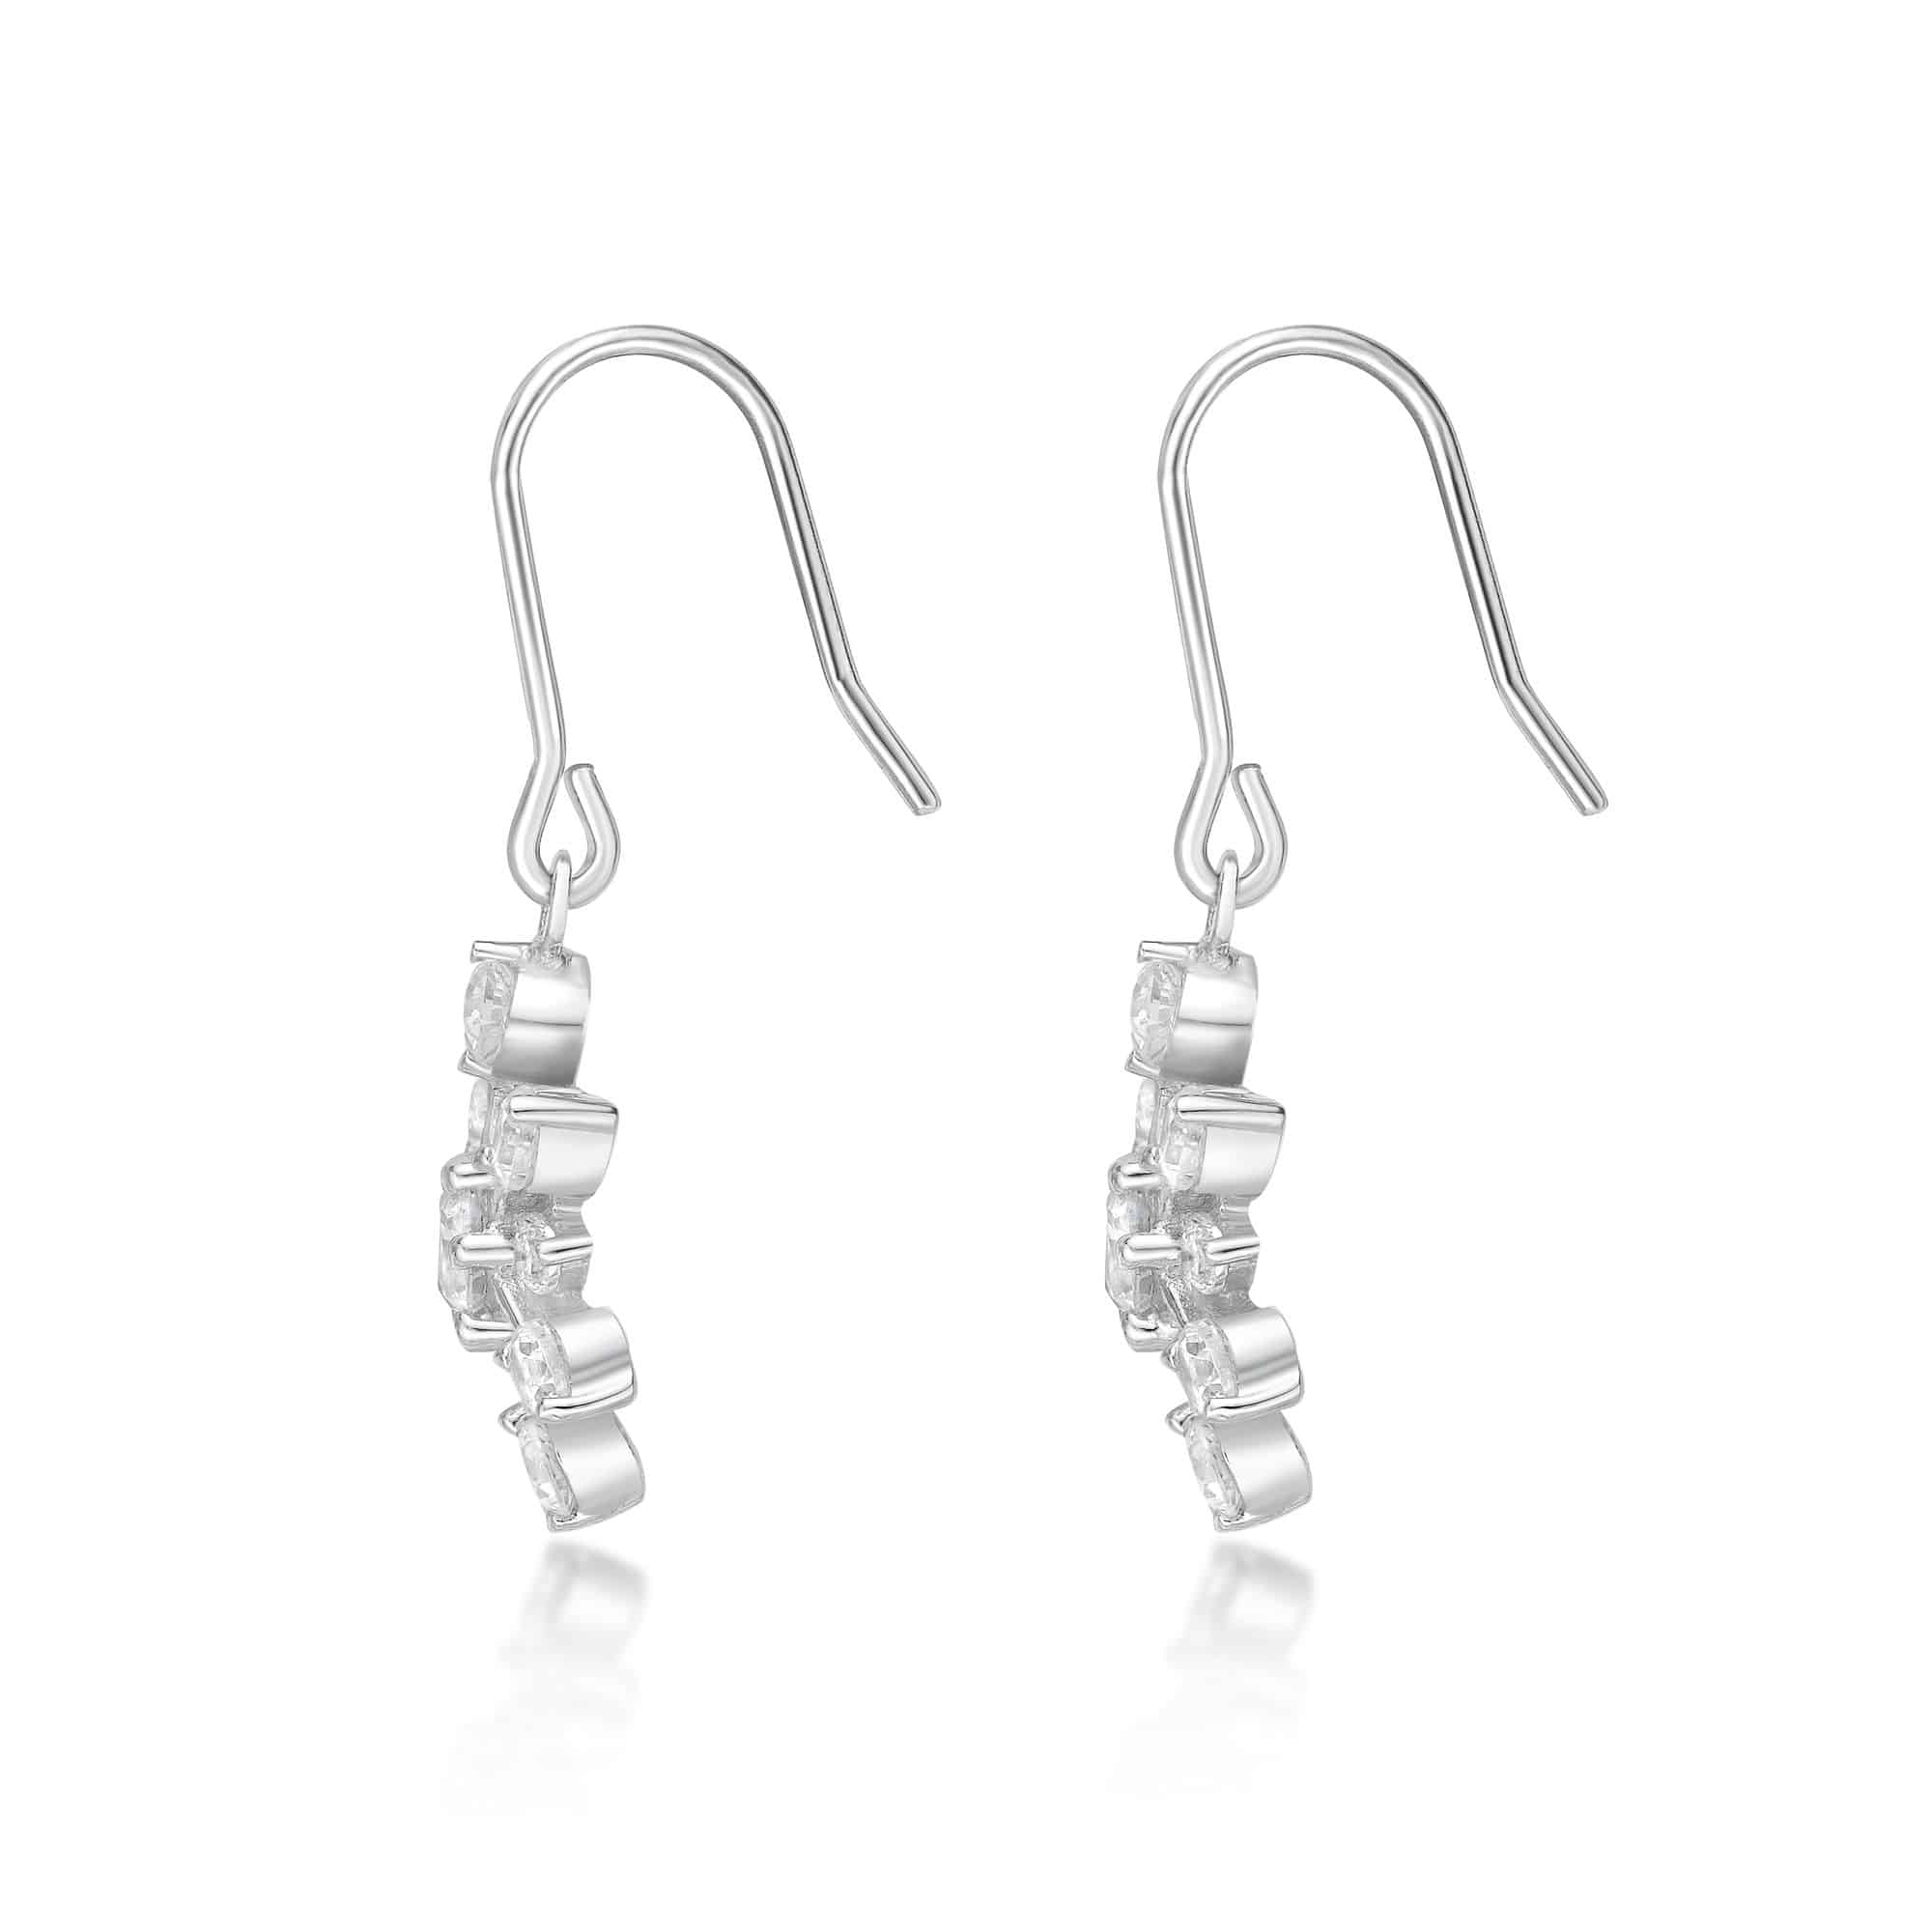 .925 Rhodium Plated Fish Hook Coil Drop Earrings, 1in, with Faceted Ball  Accent, Women, Girls